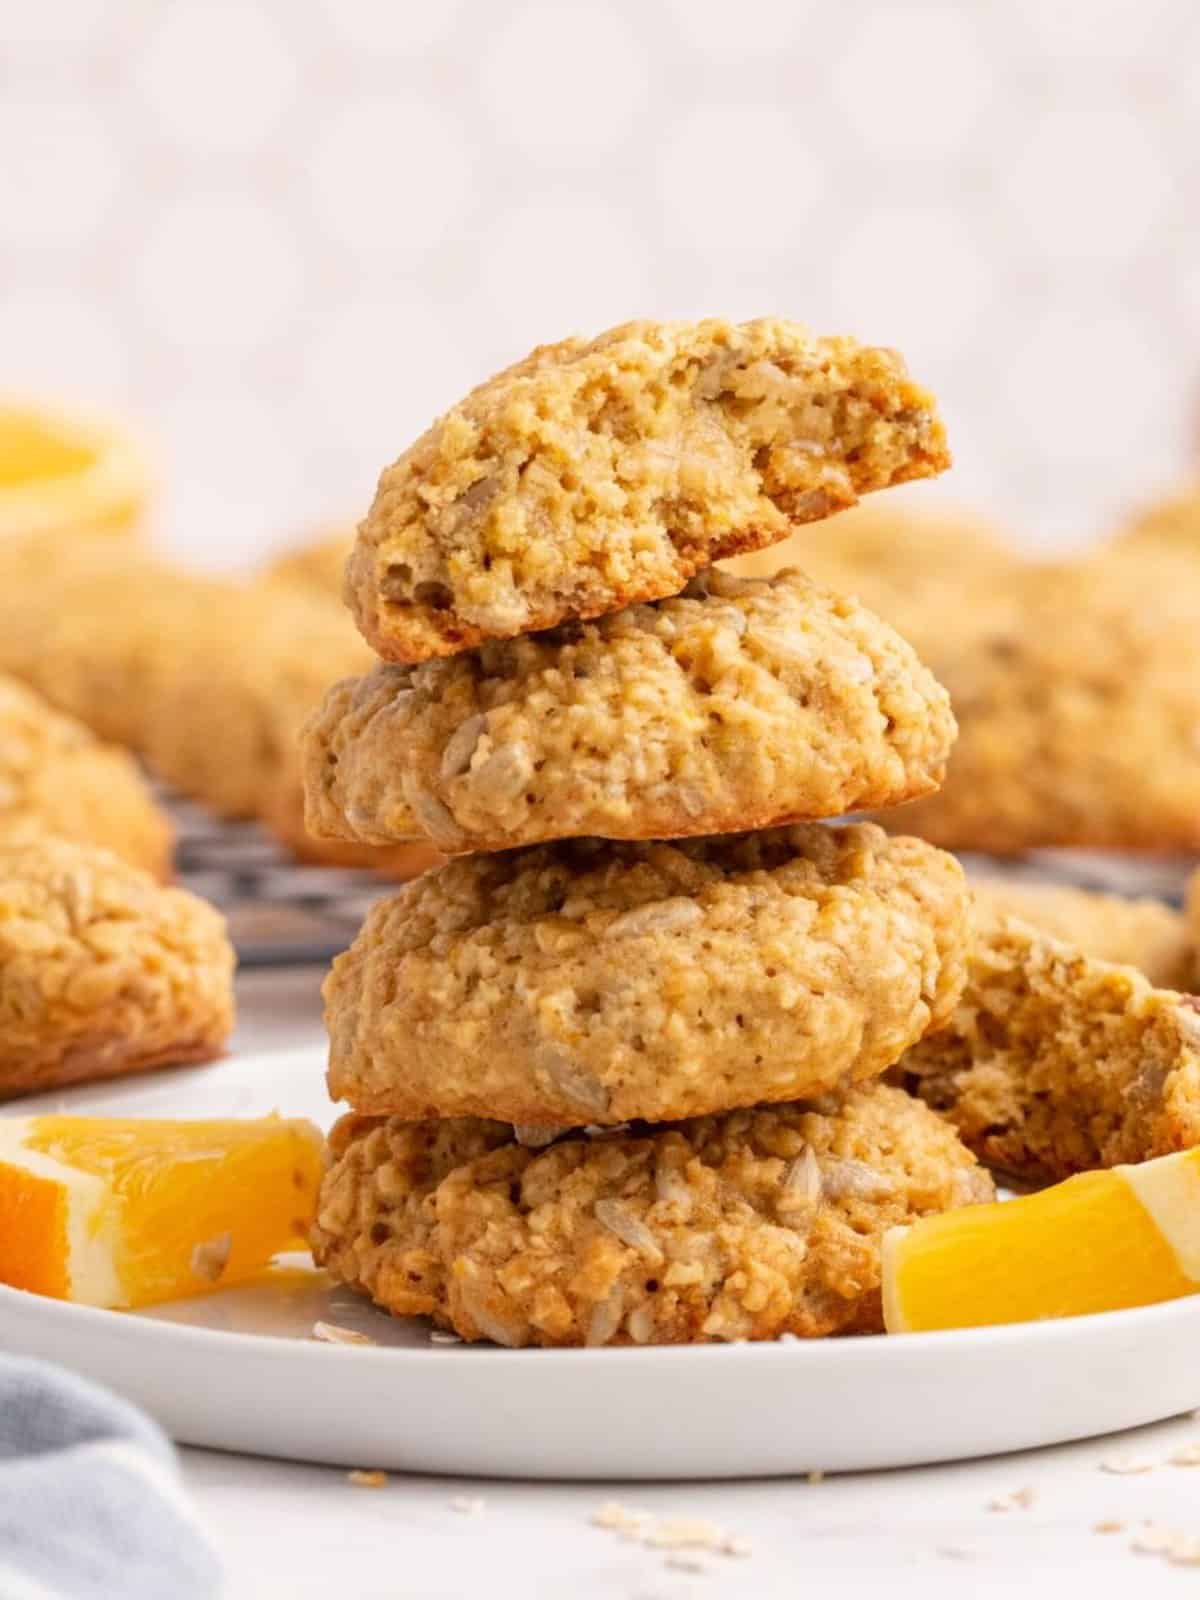 A stack of Sunflower Cookies on a white plate garnished with fresh orange wedges.